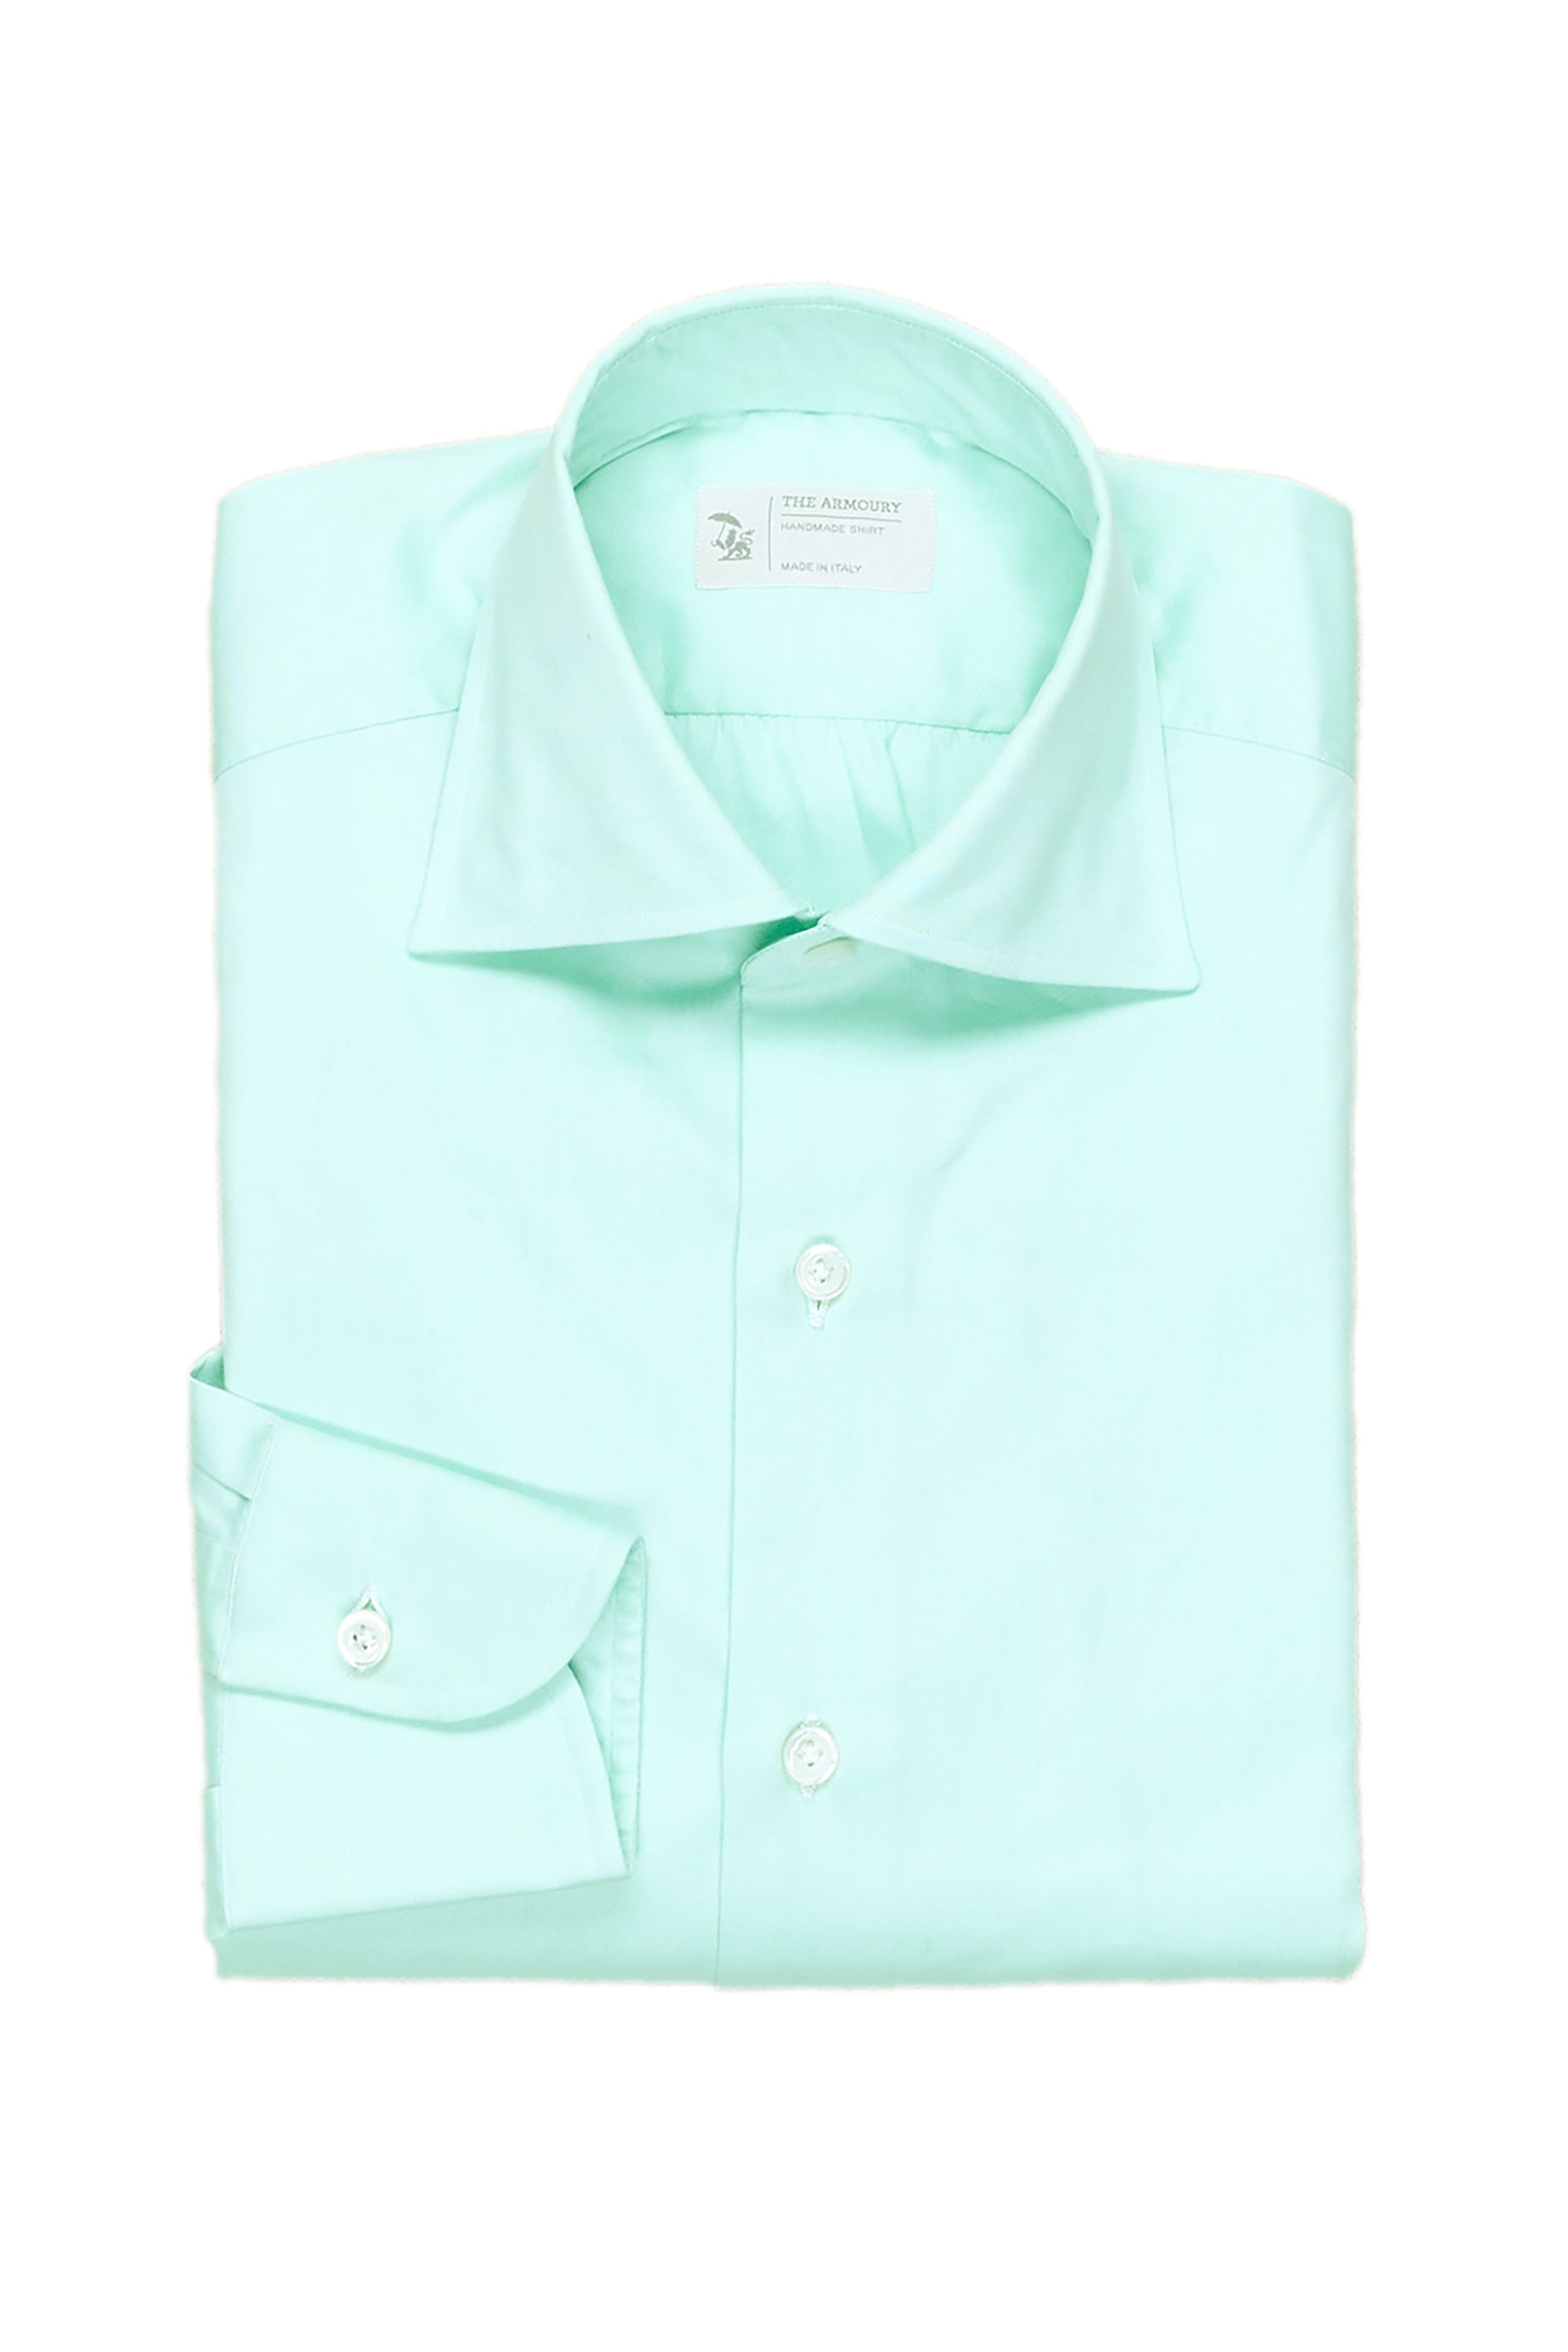 The Armoury Mint Green Cotton Oxford Spread Collar Shirt